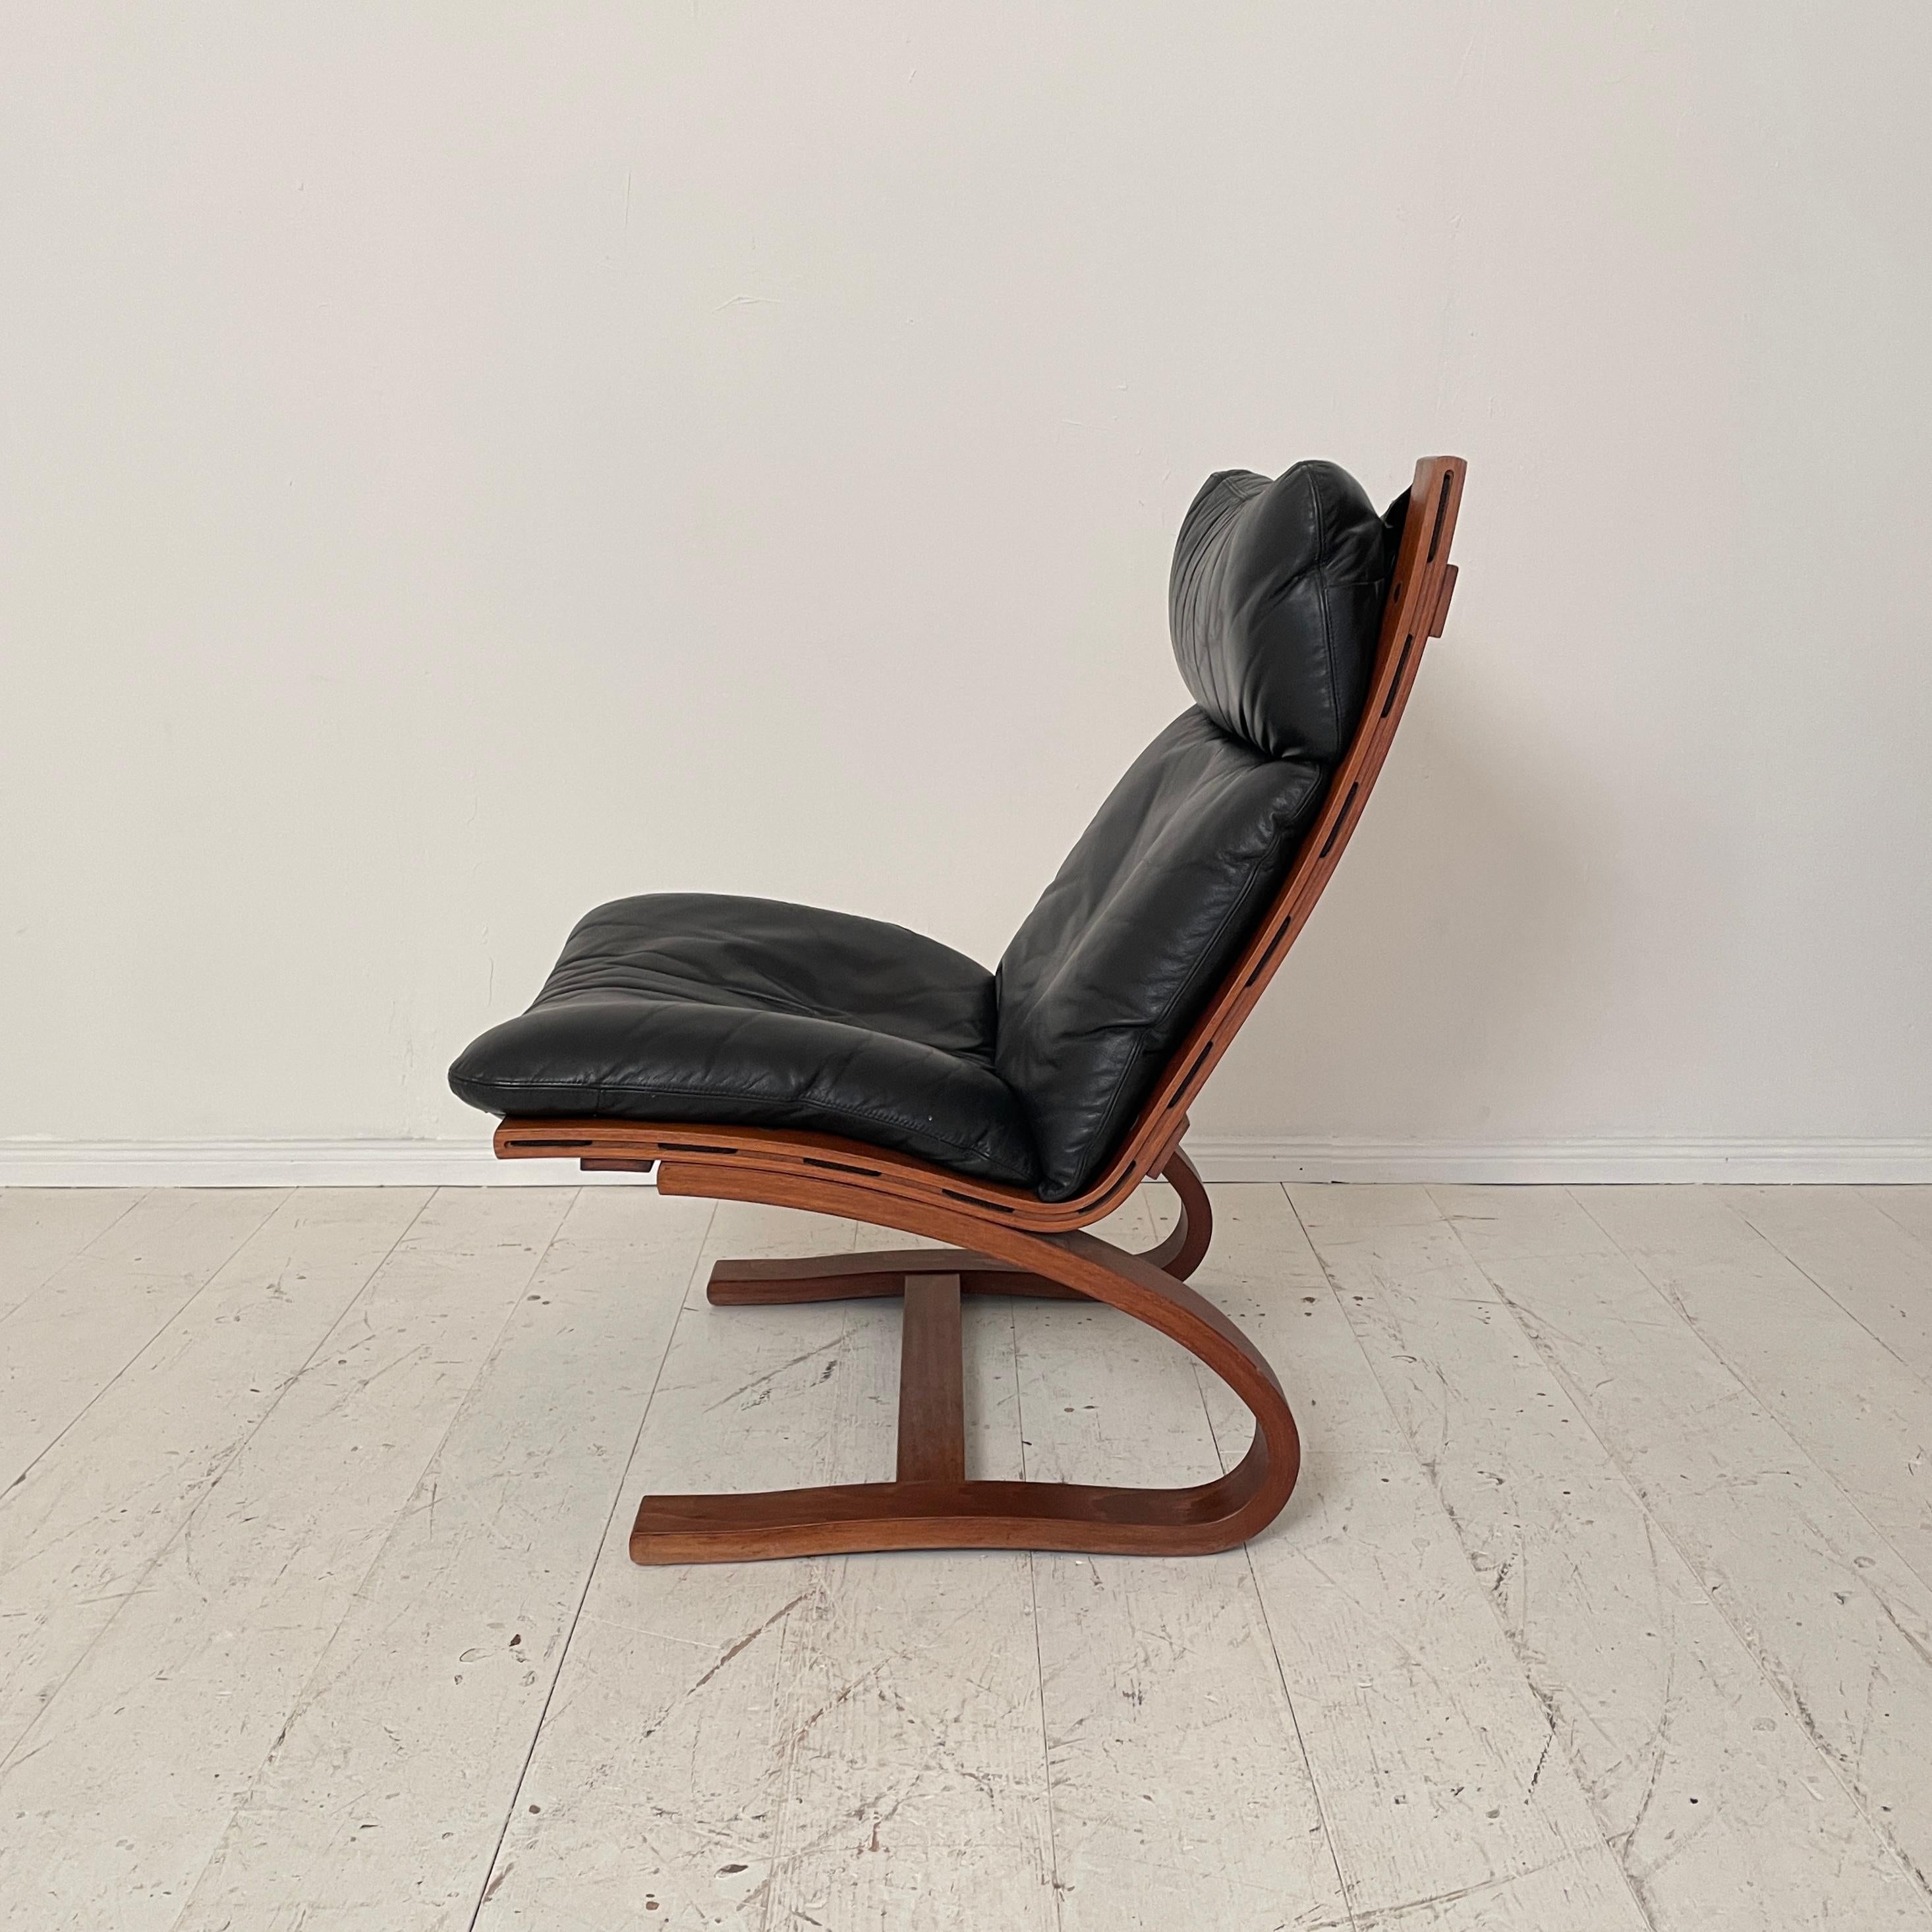 Late 20th Century Mid-Century Lounge Chair “Siesta”, by Ingmar Relling for Westnofa Black, 1970s